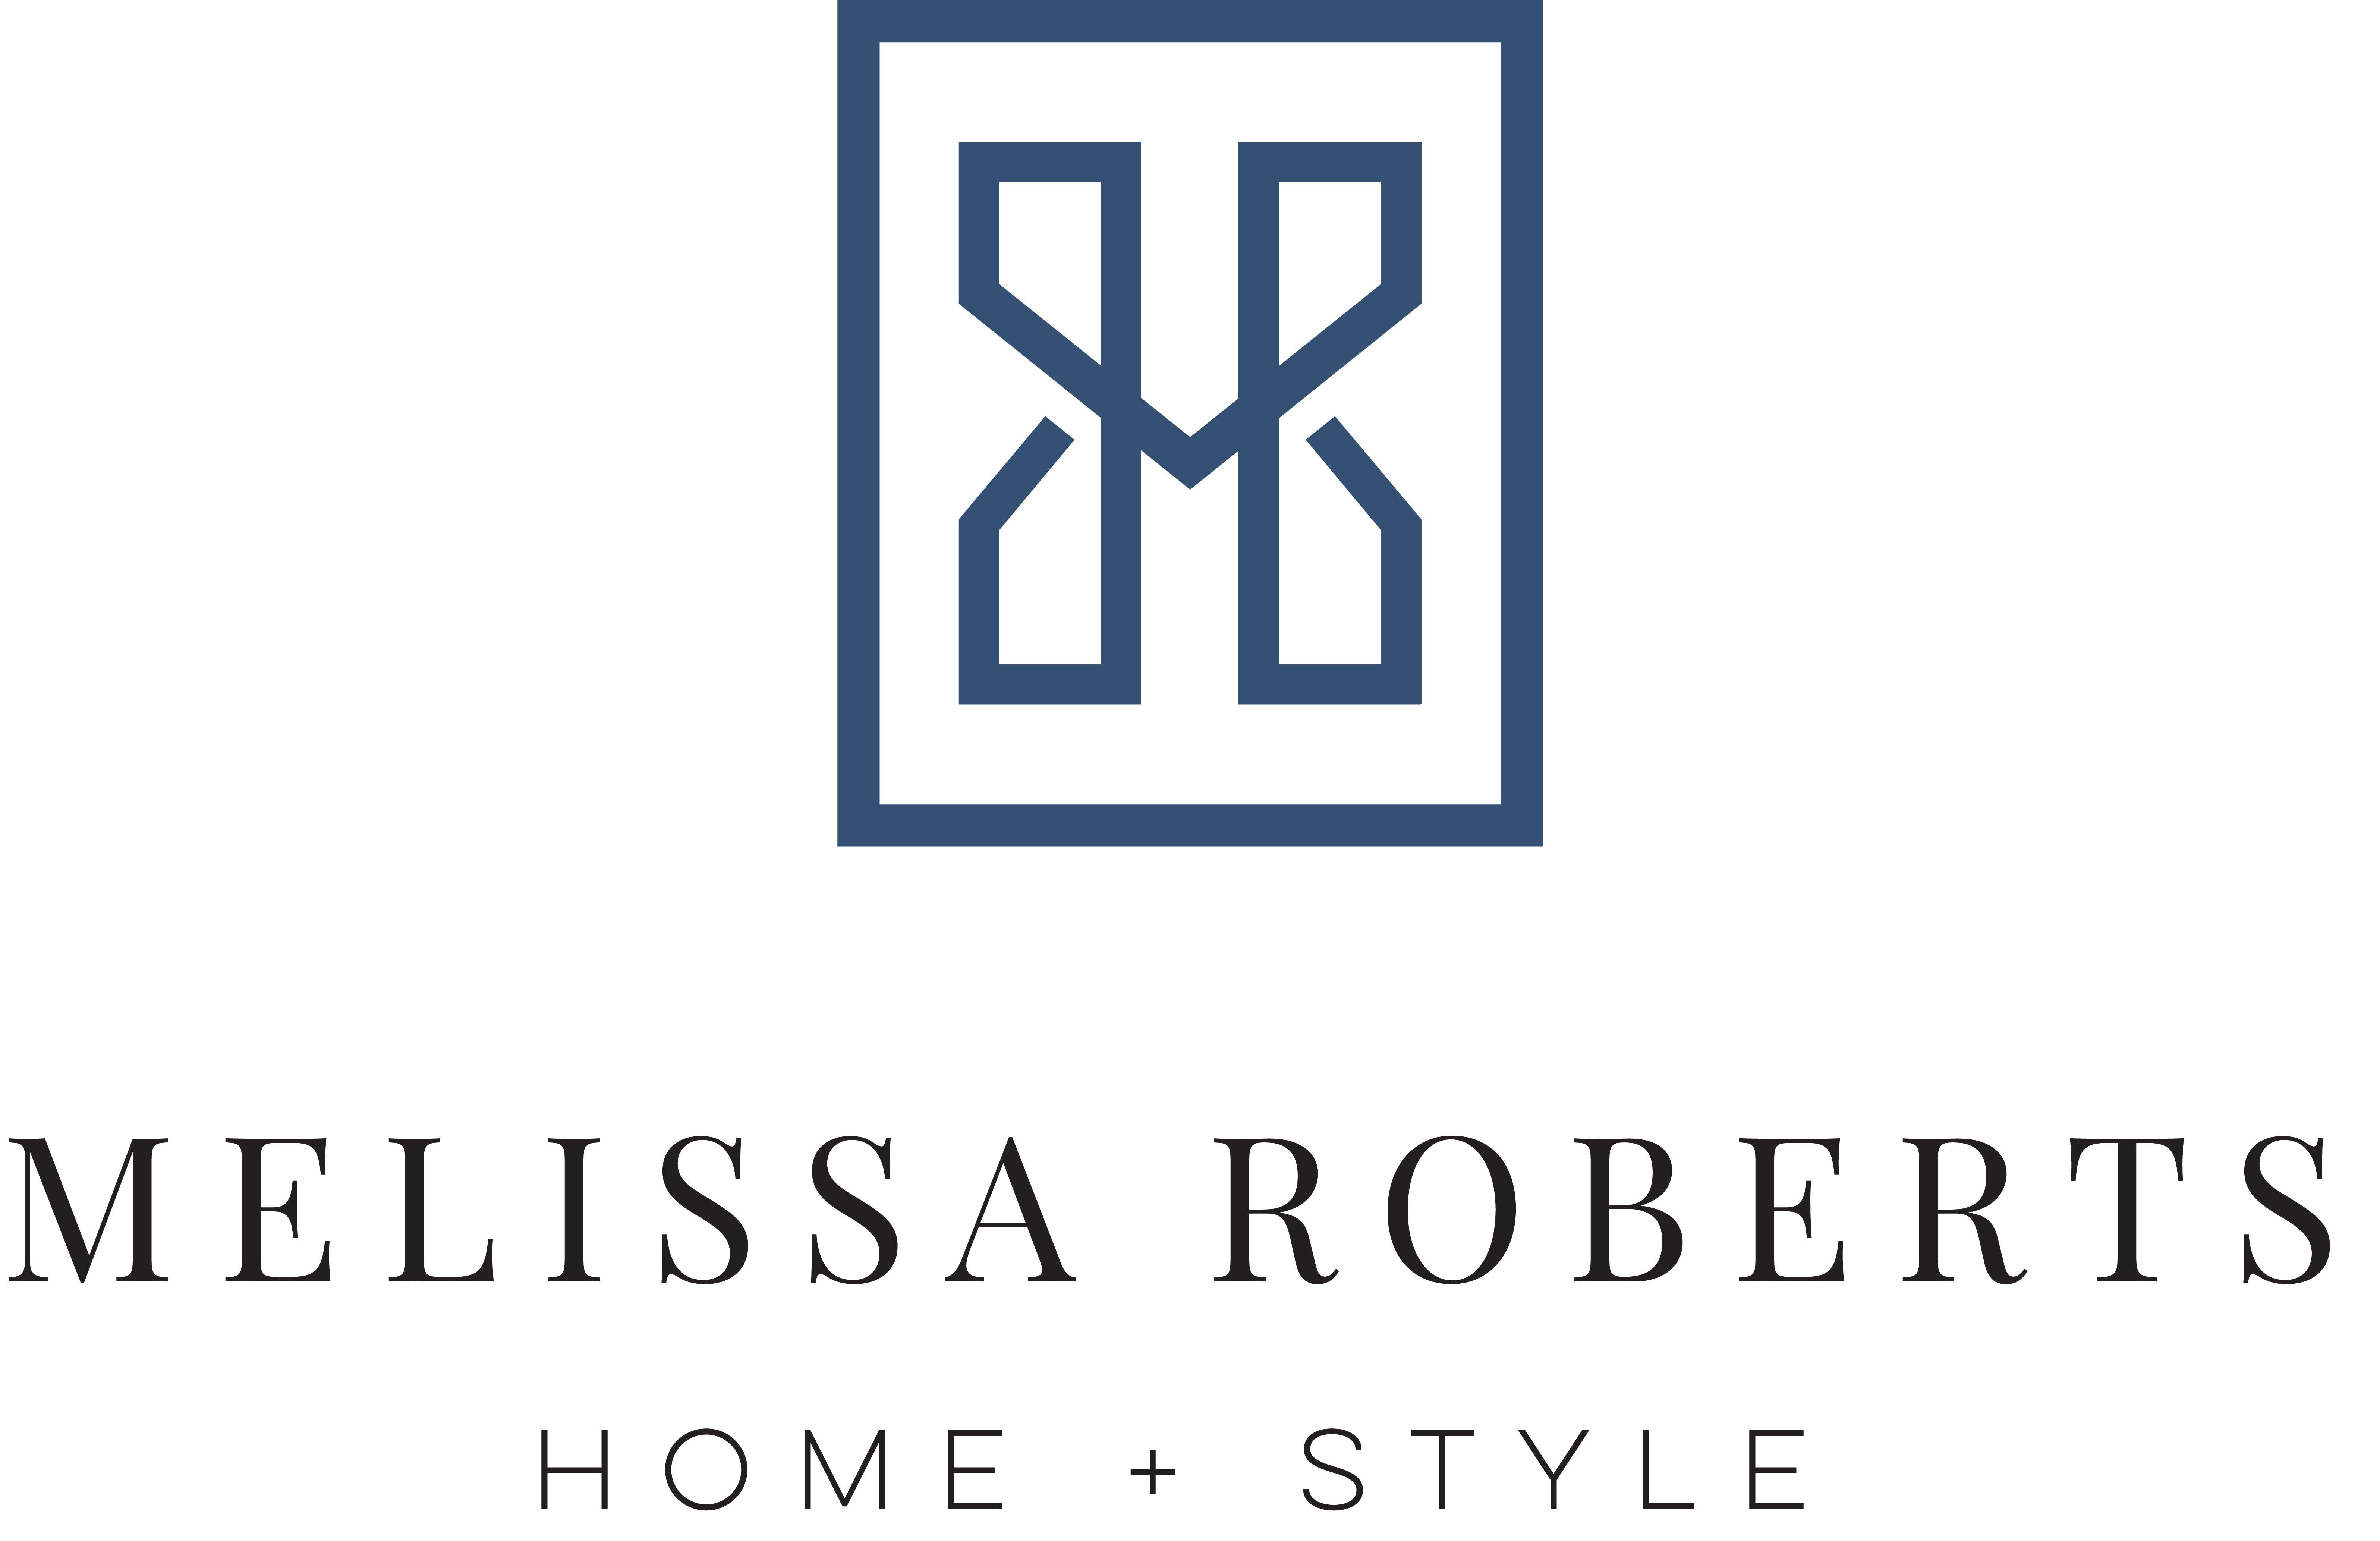 Creating A Logo And Branding Your Business Melissa Roberts